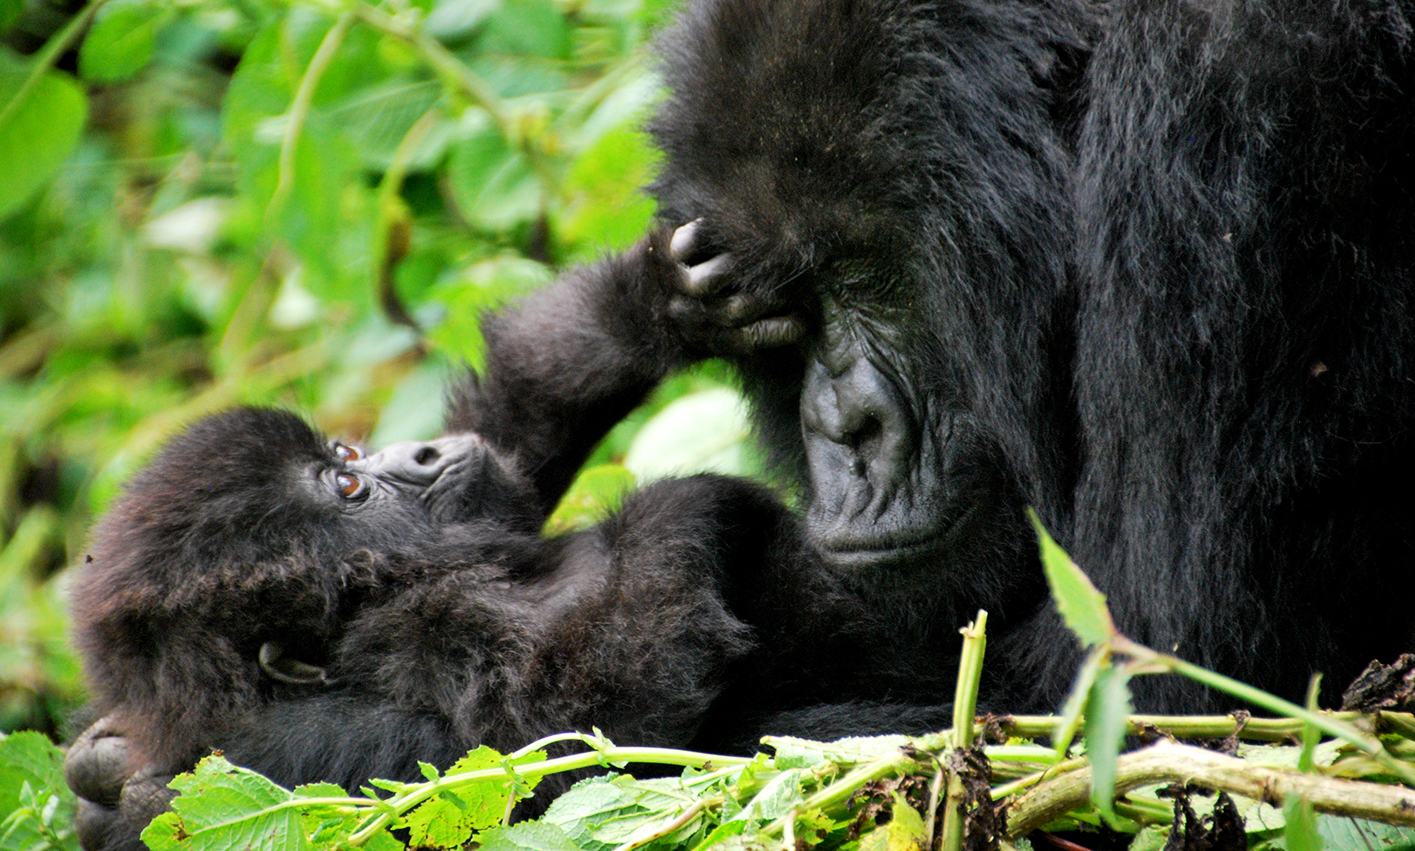 Mother and child of the Sabyinyo group of mountain gorillas in Volcanoes National Park, Rwanda.